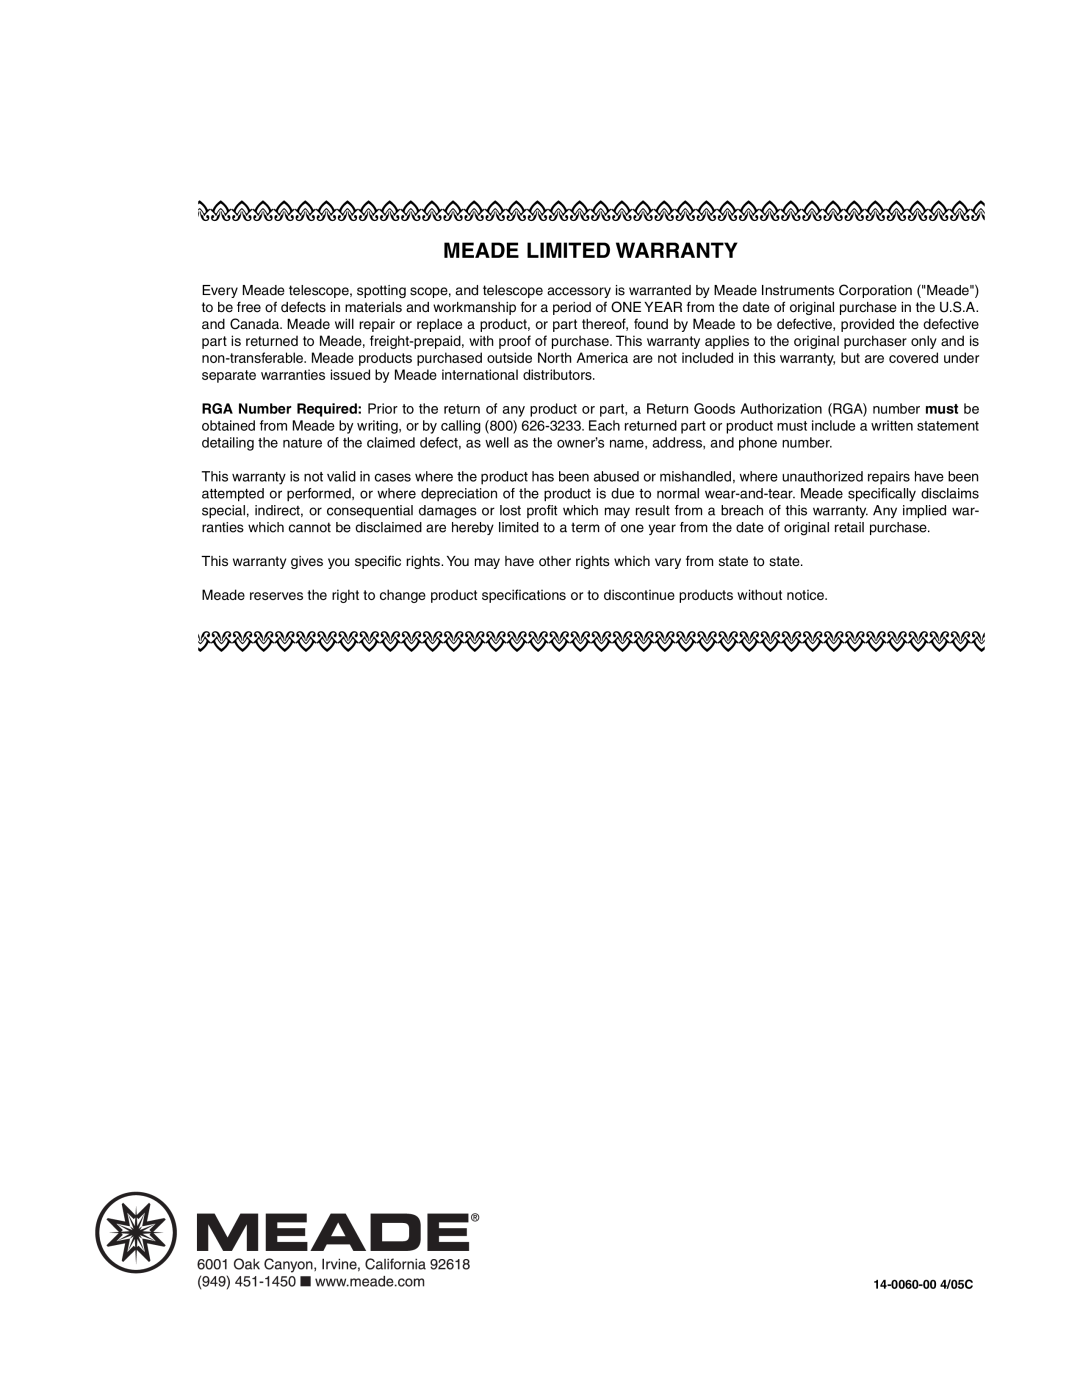 Meade NGC instruction manual Meade Limited Warranty, 14-0060-00 4/05C 